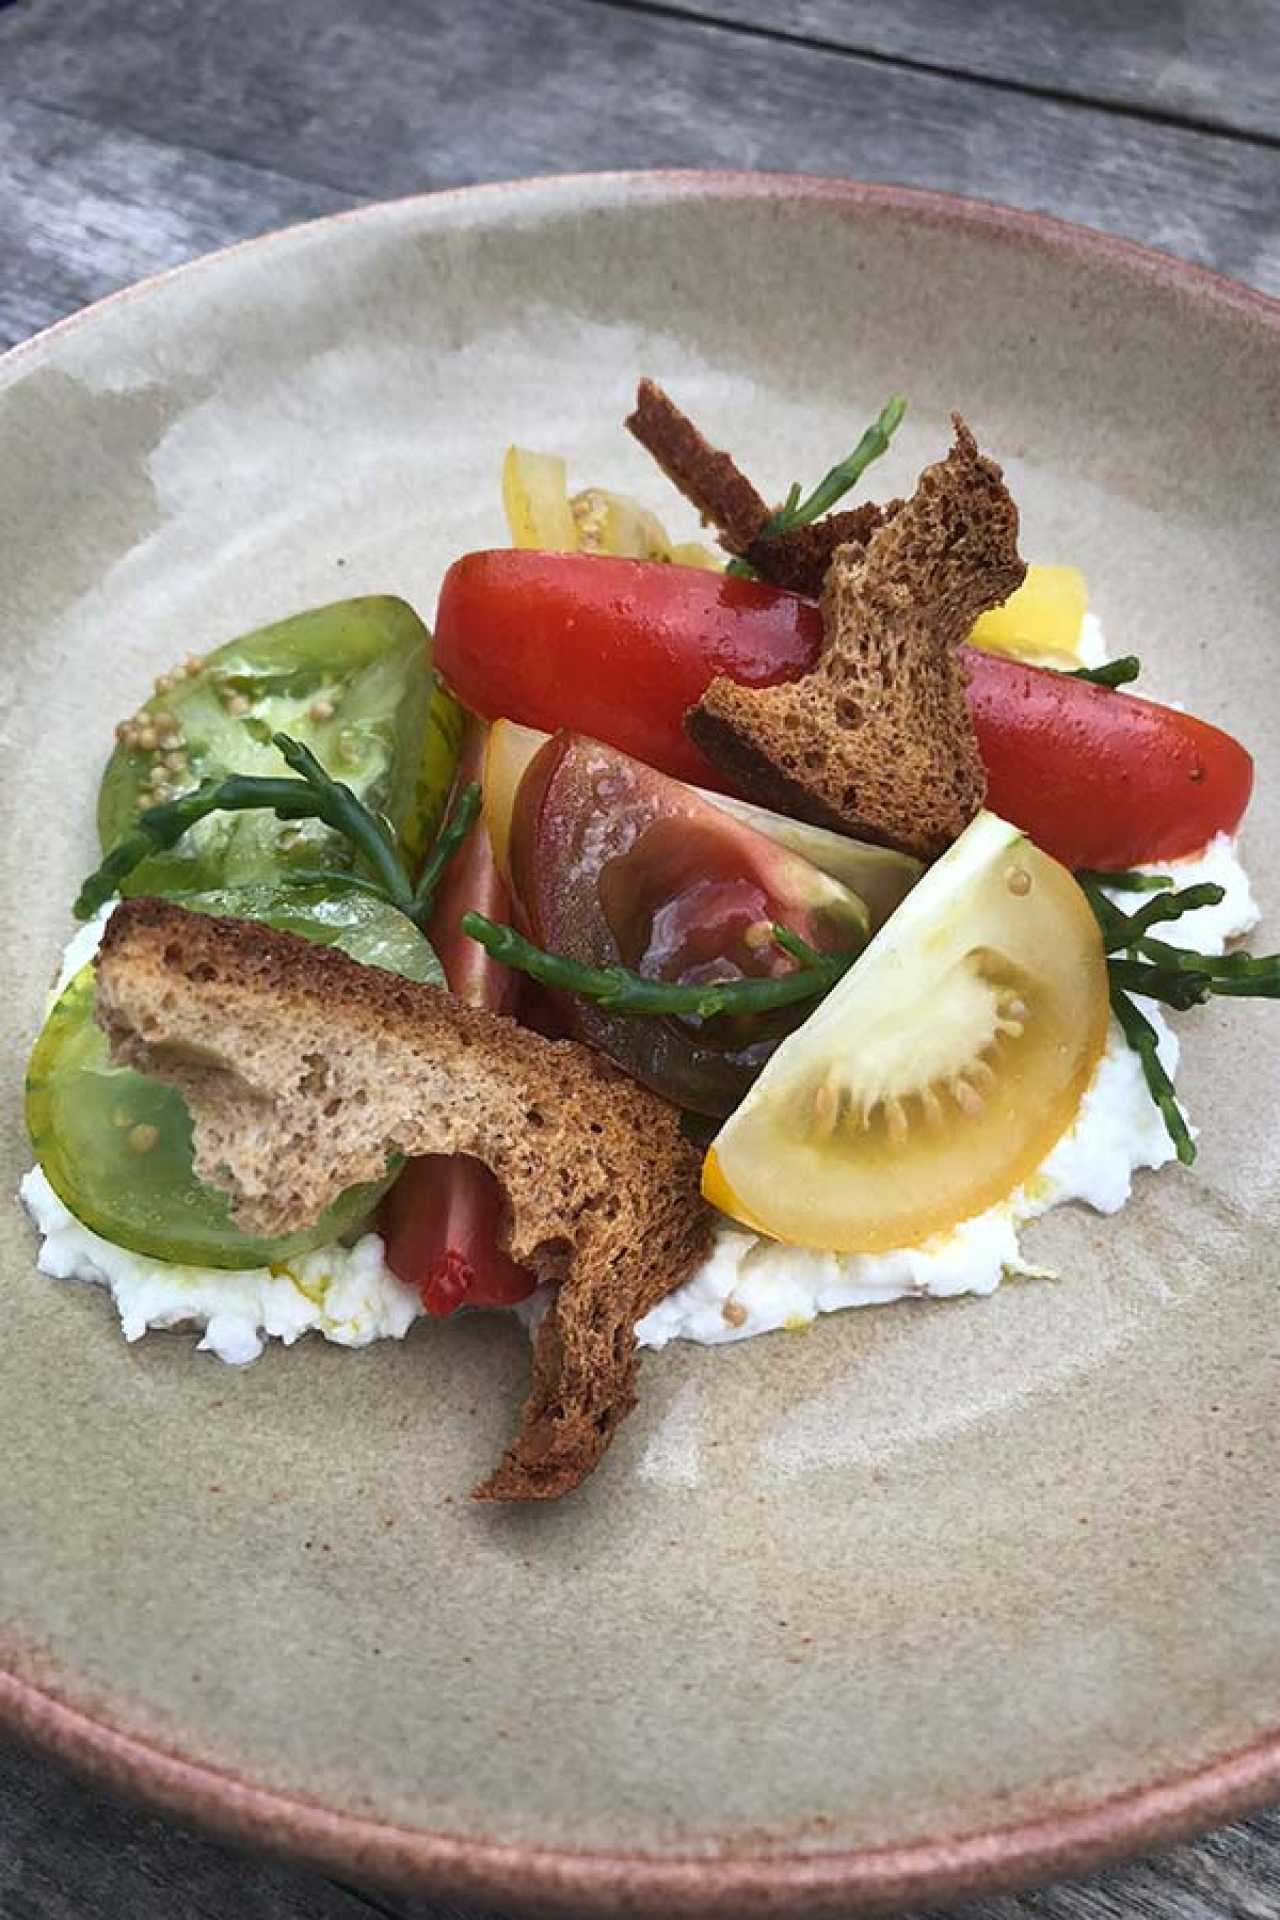 Tomatoes, goats curd, pickled mustard seed, samphire, crouton, elderflower and tarragon vinaigrette from Oxalis